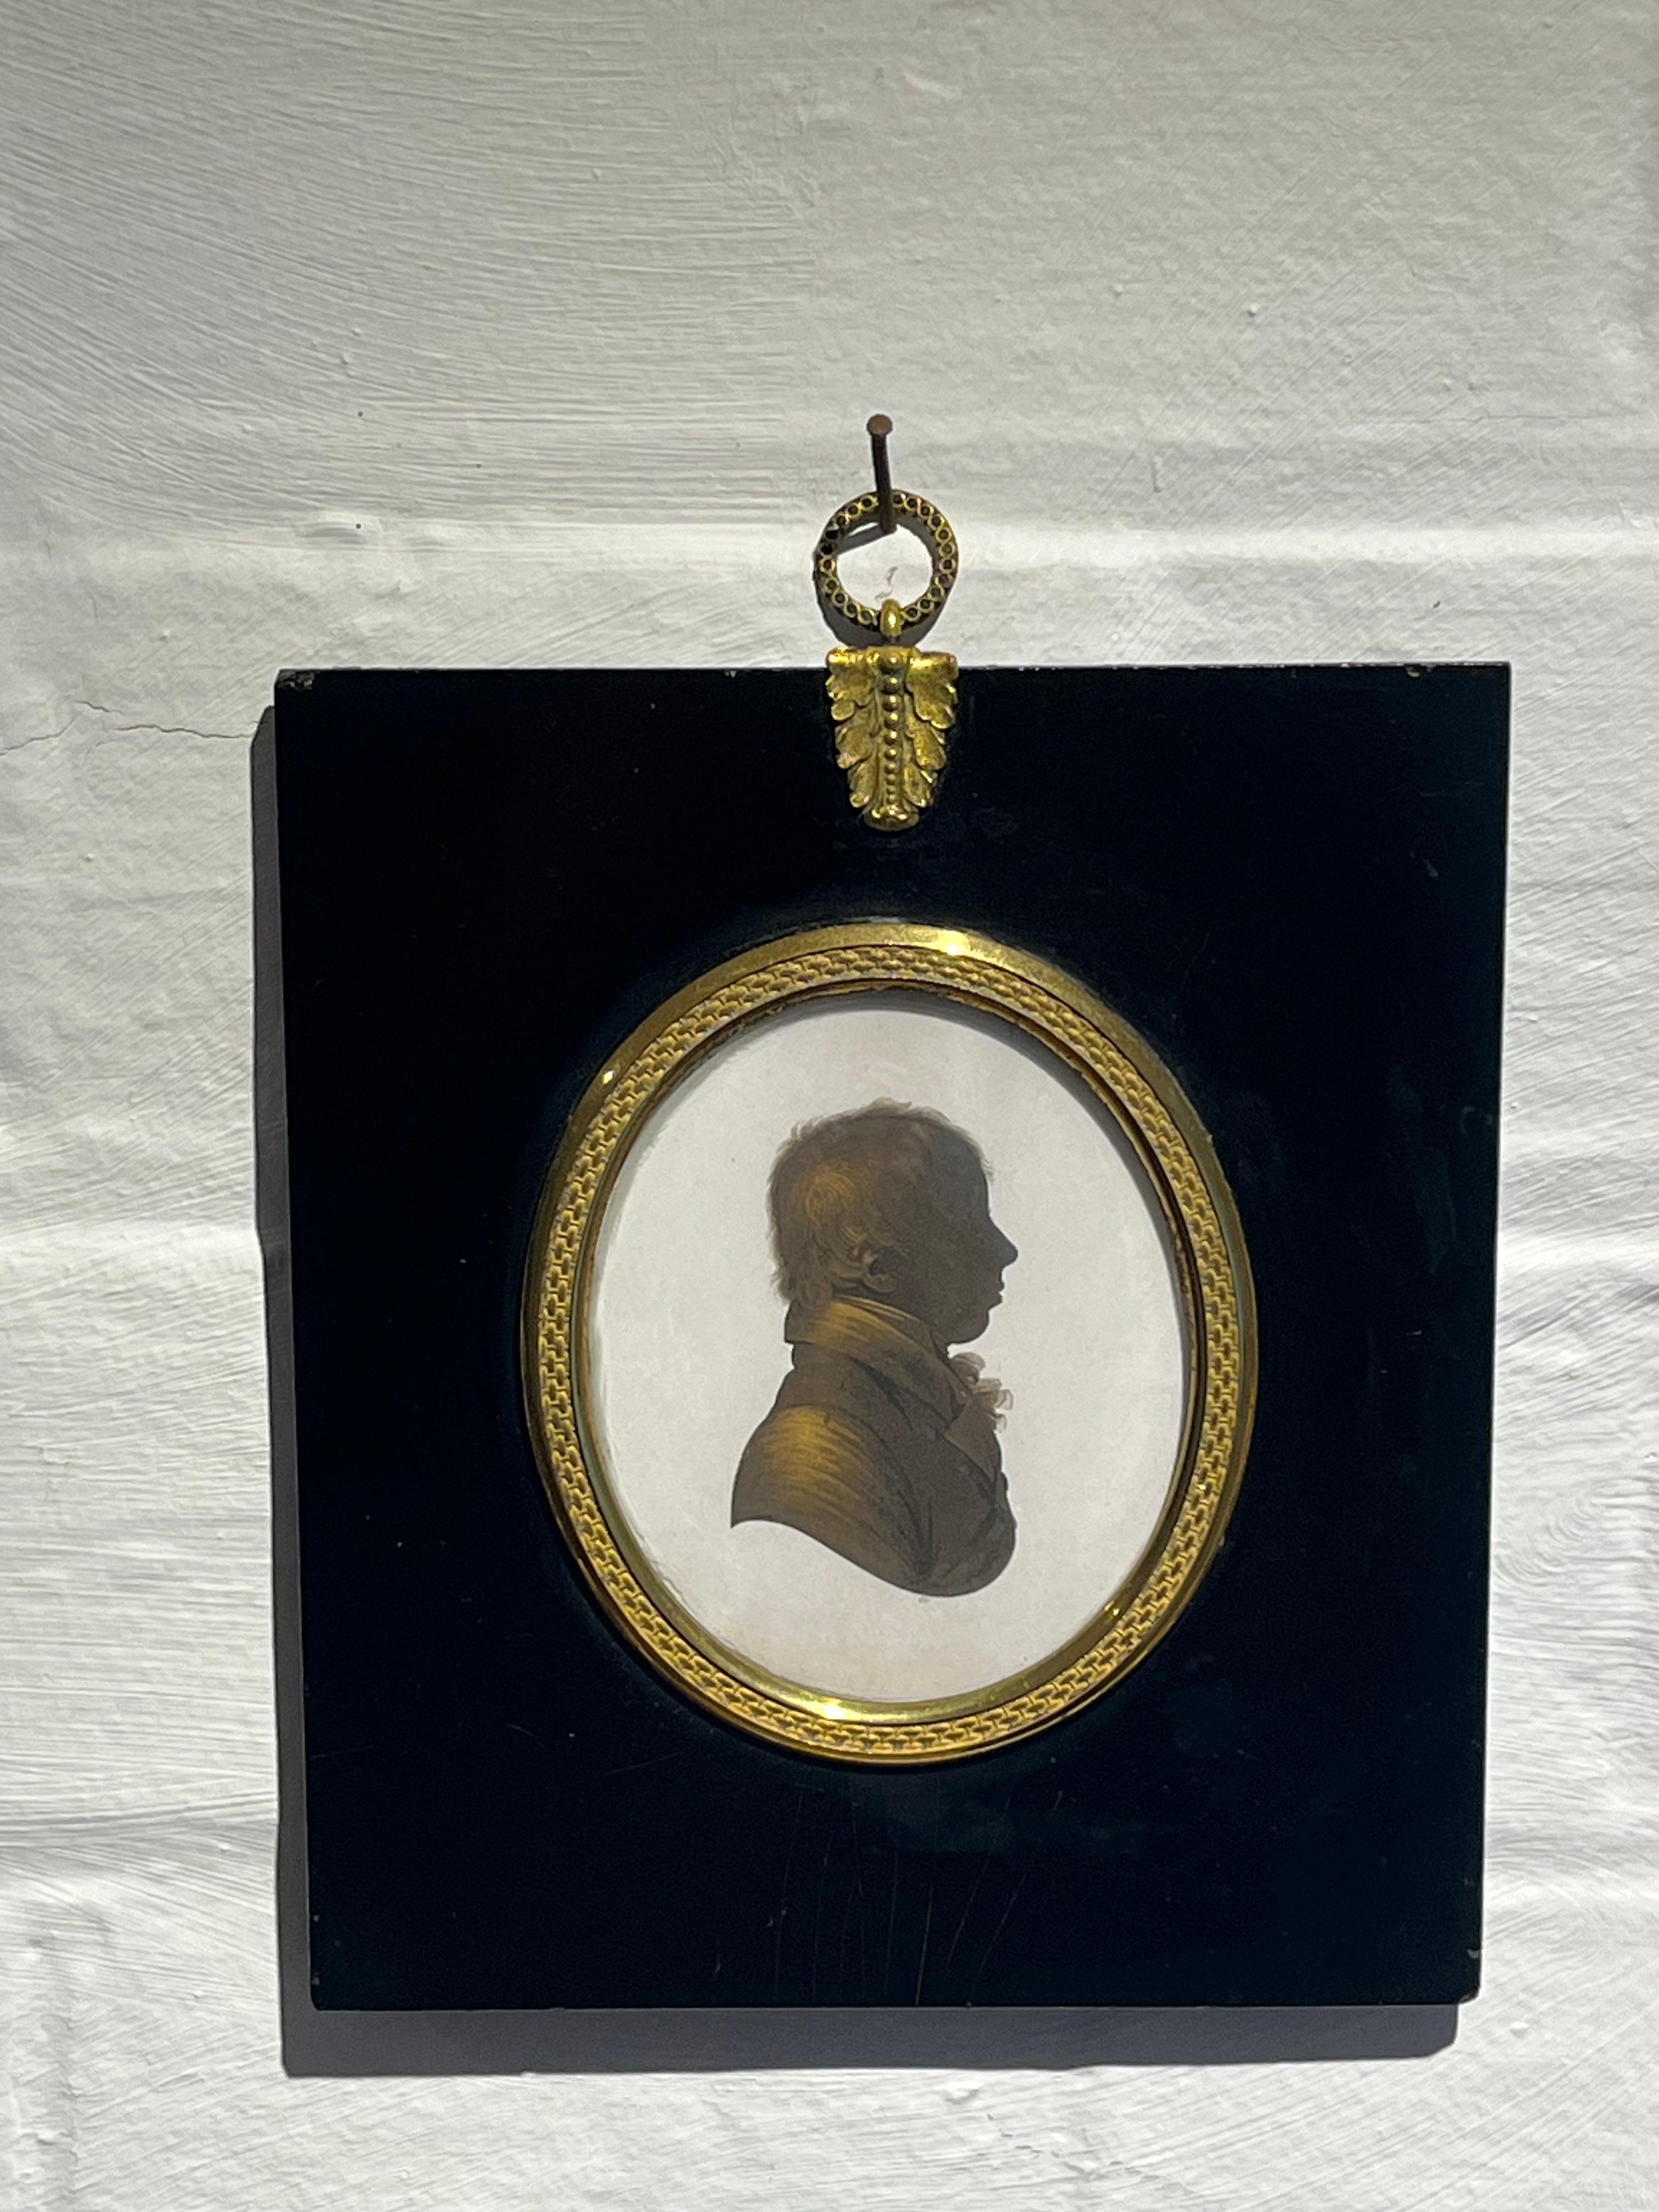 A very finely detailed silhouette in very good condition by one of the truly great silhouette artists of the Georgian period.

John Field (1758-1821)
Portrait of a young gentleman
Watercolour with bronze touches on plaster
3 x 2½ inches, oval,